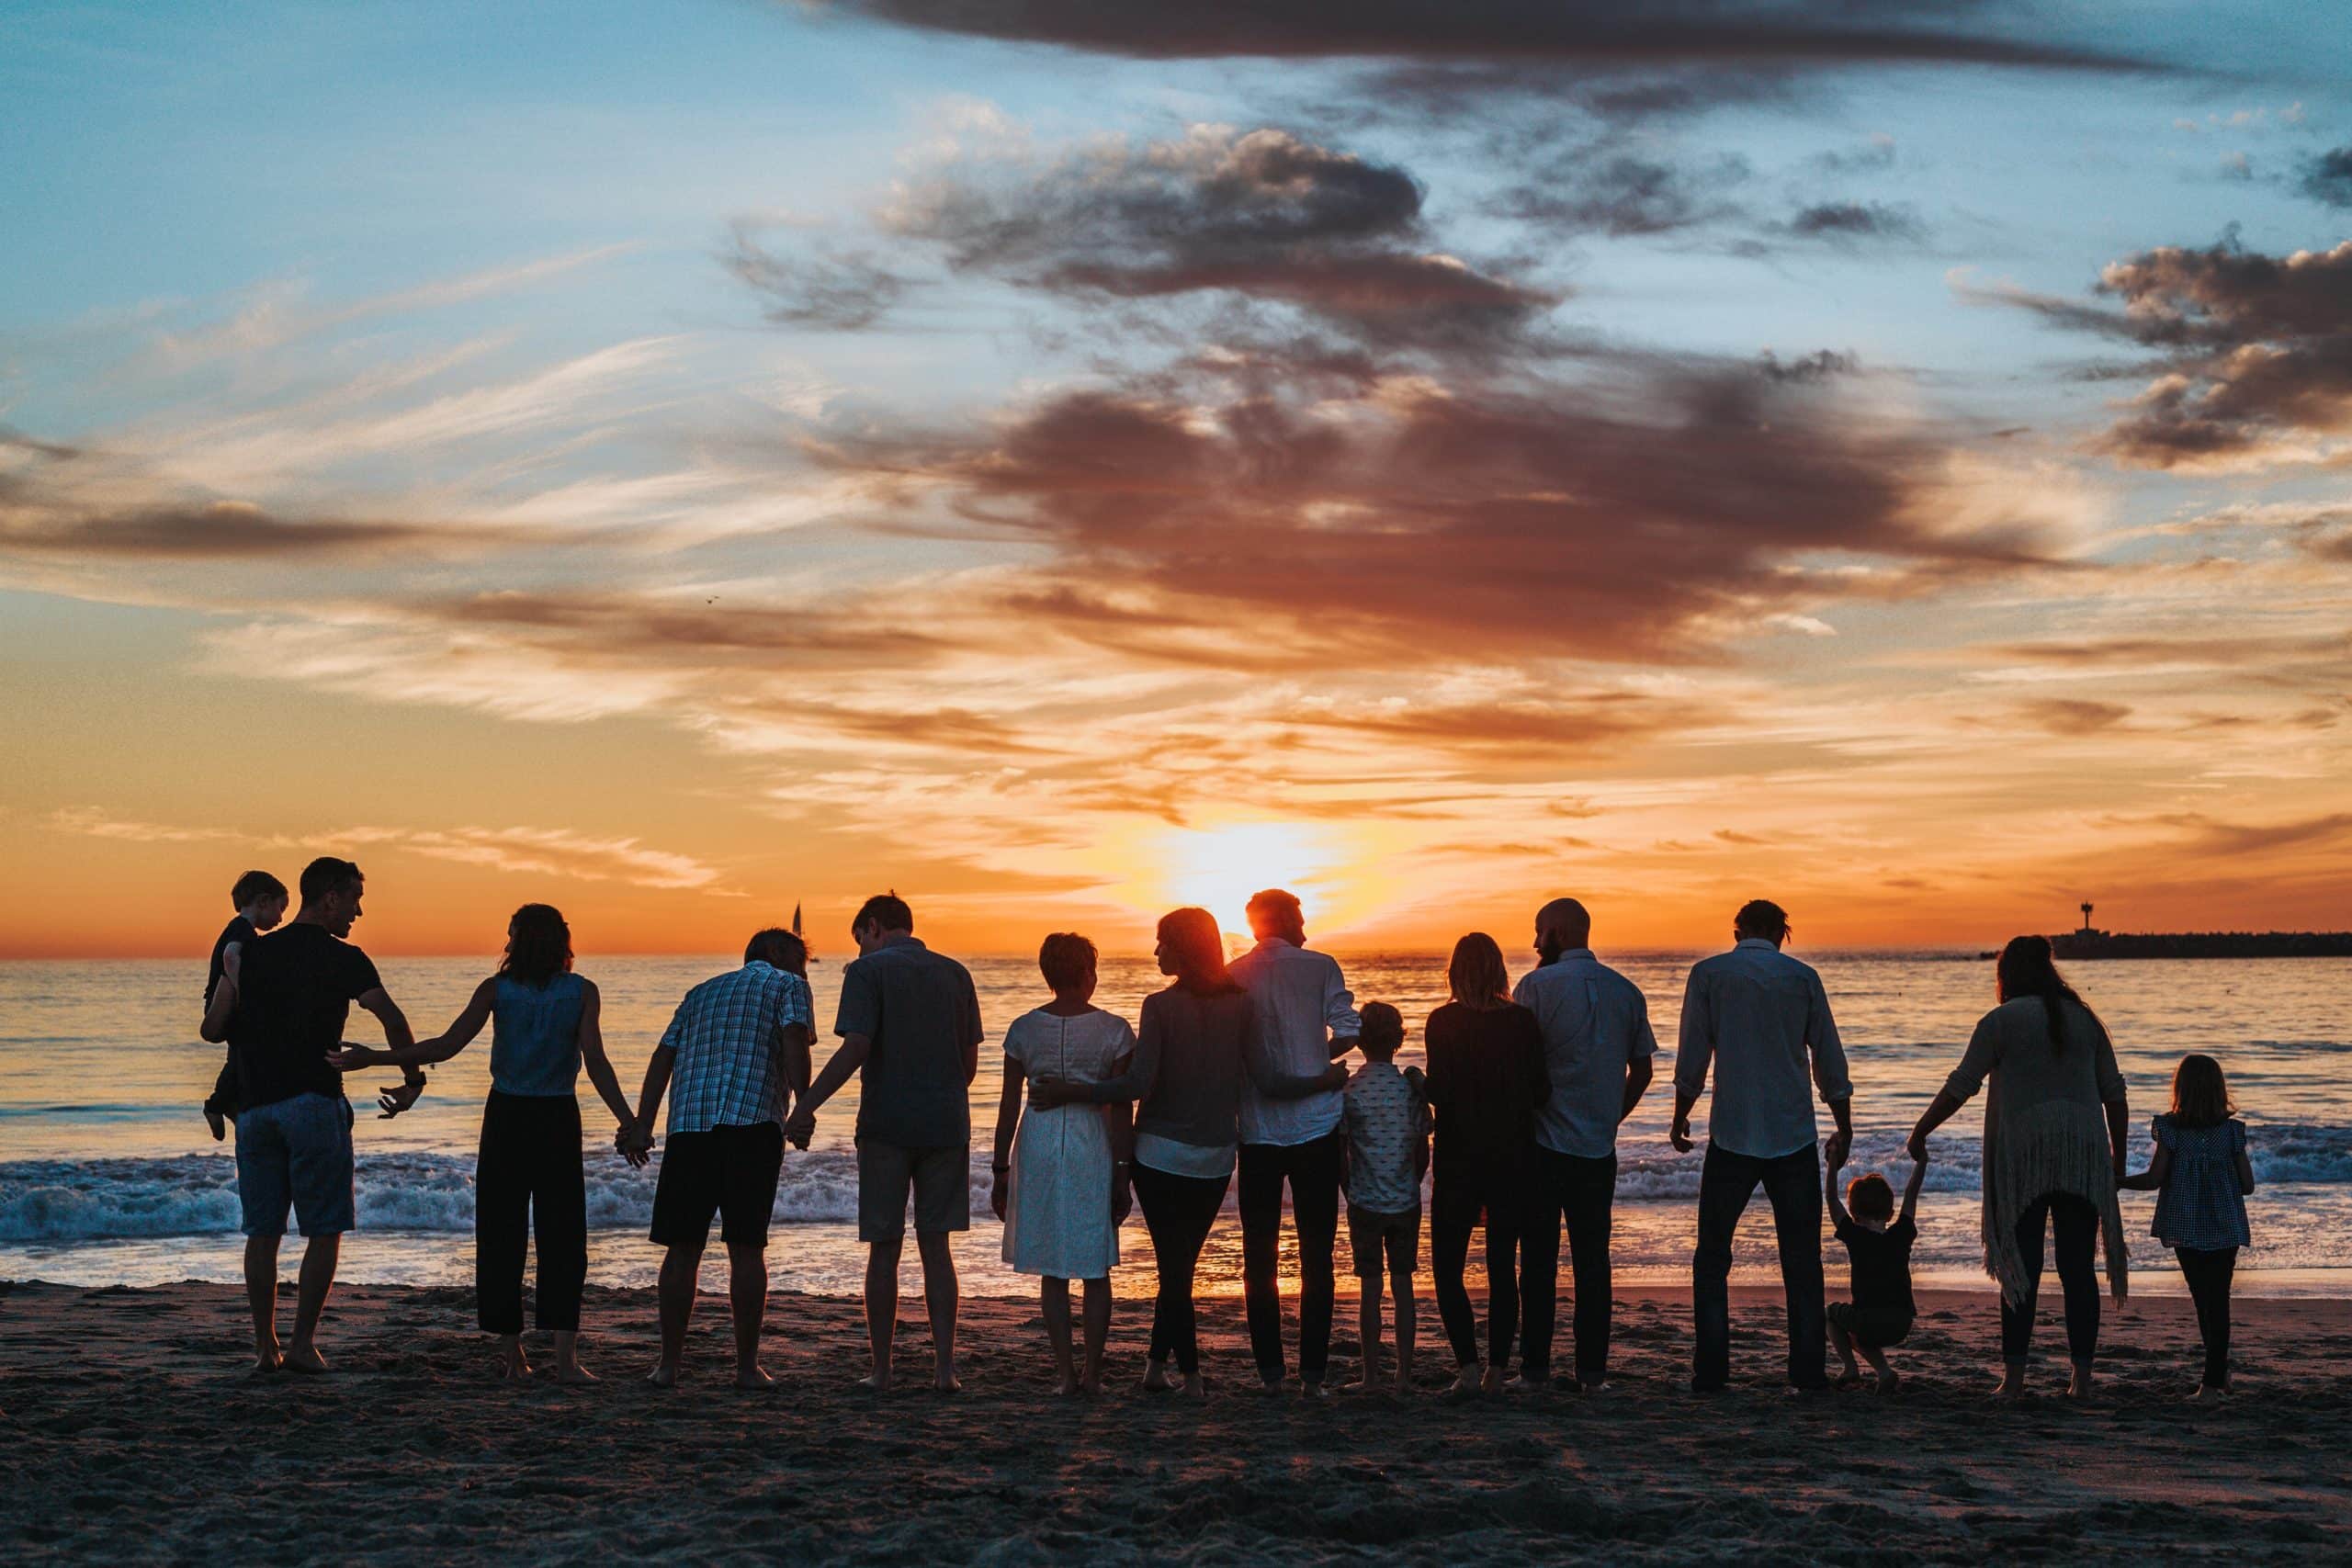 People staring at sunset on a beach